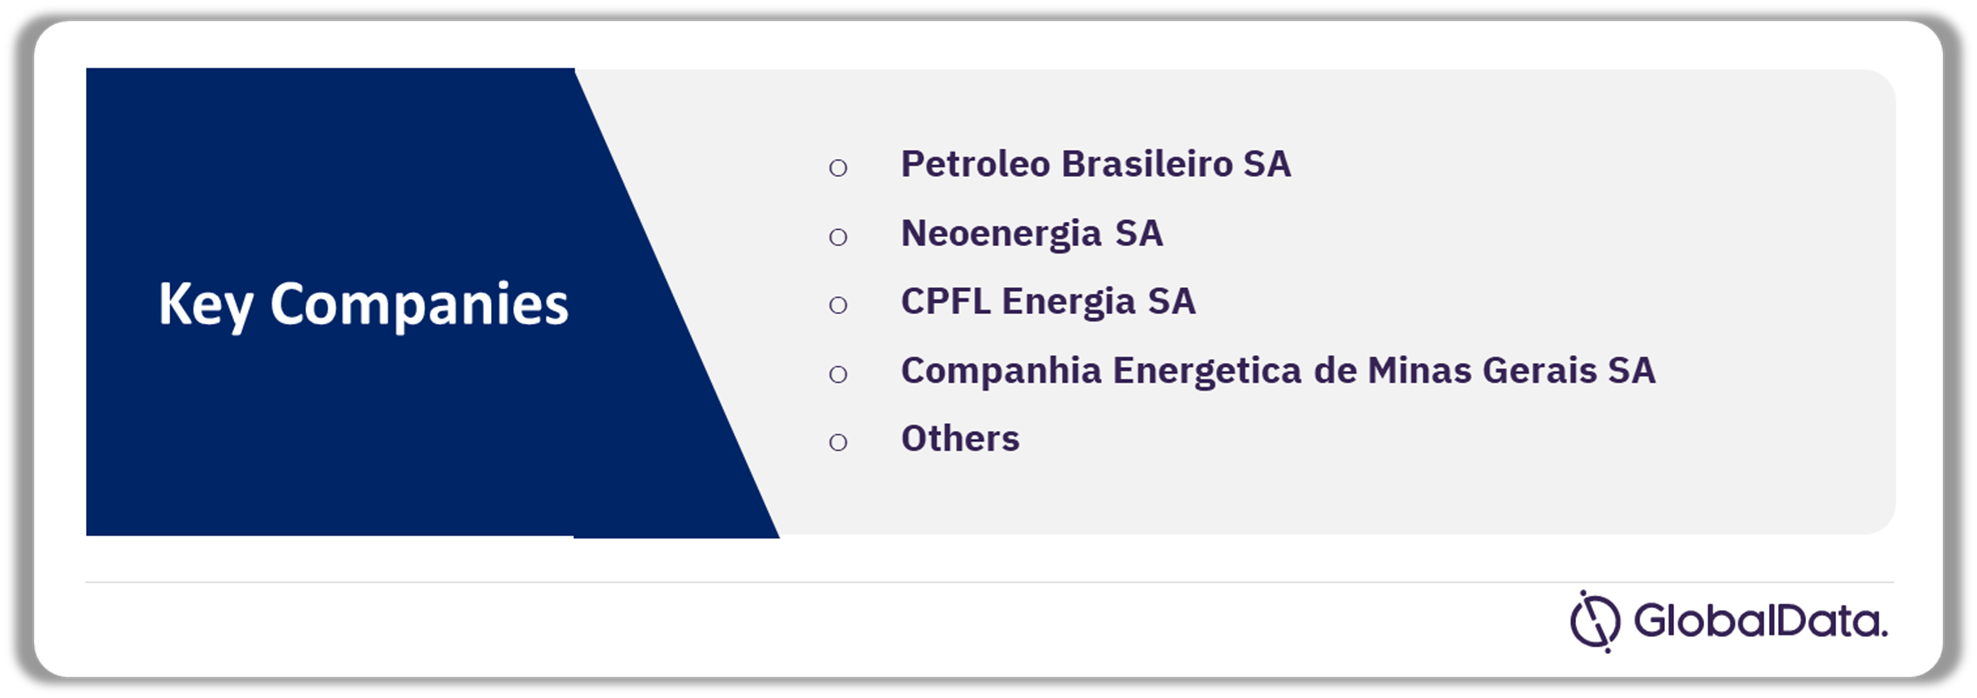 Brazil Thermal Power Market Analysis by Companies